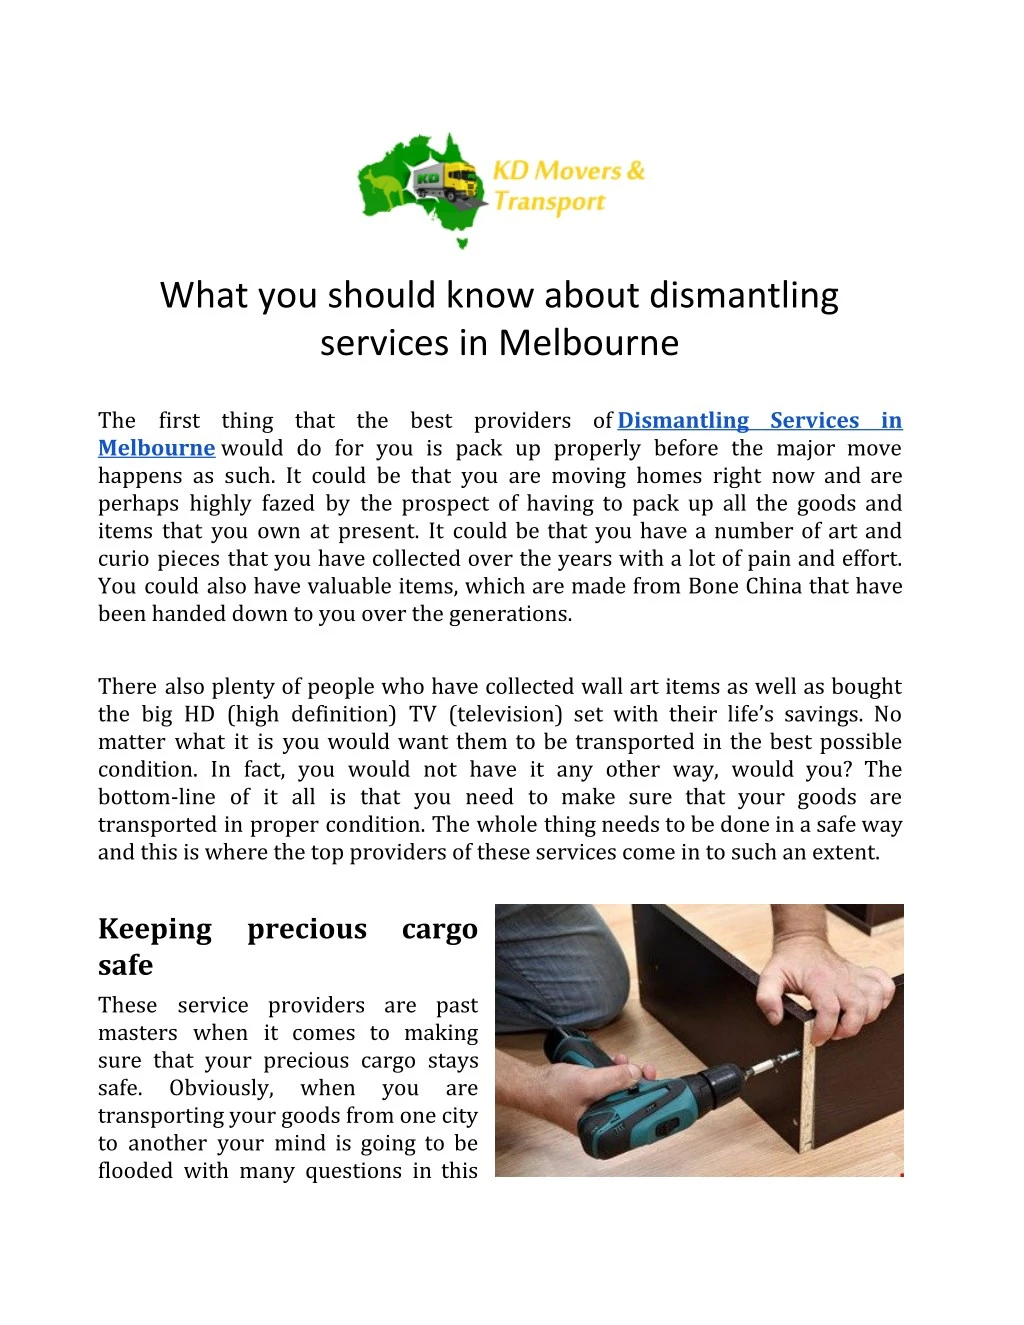 what you should know about dismantling services